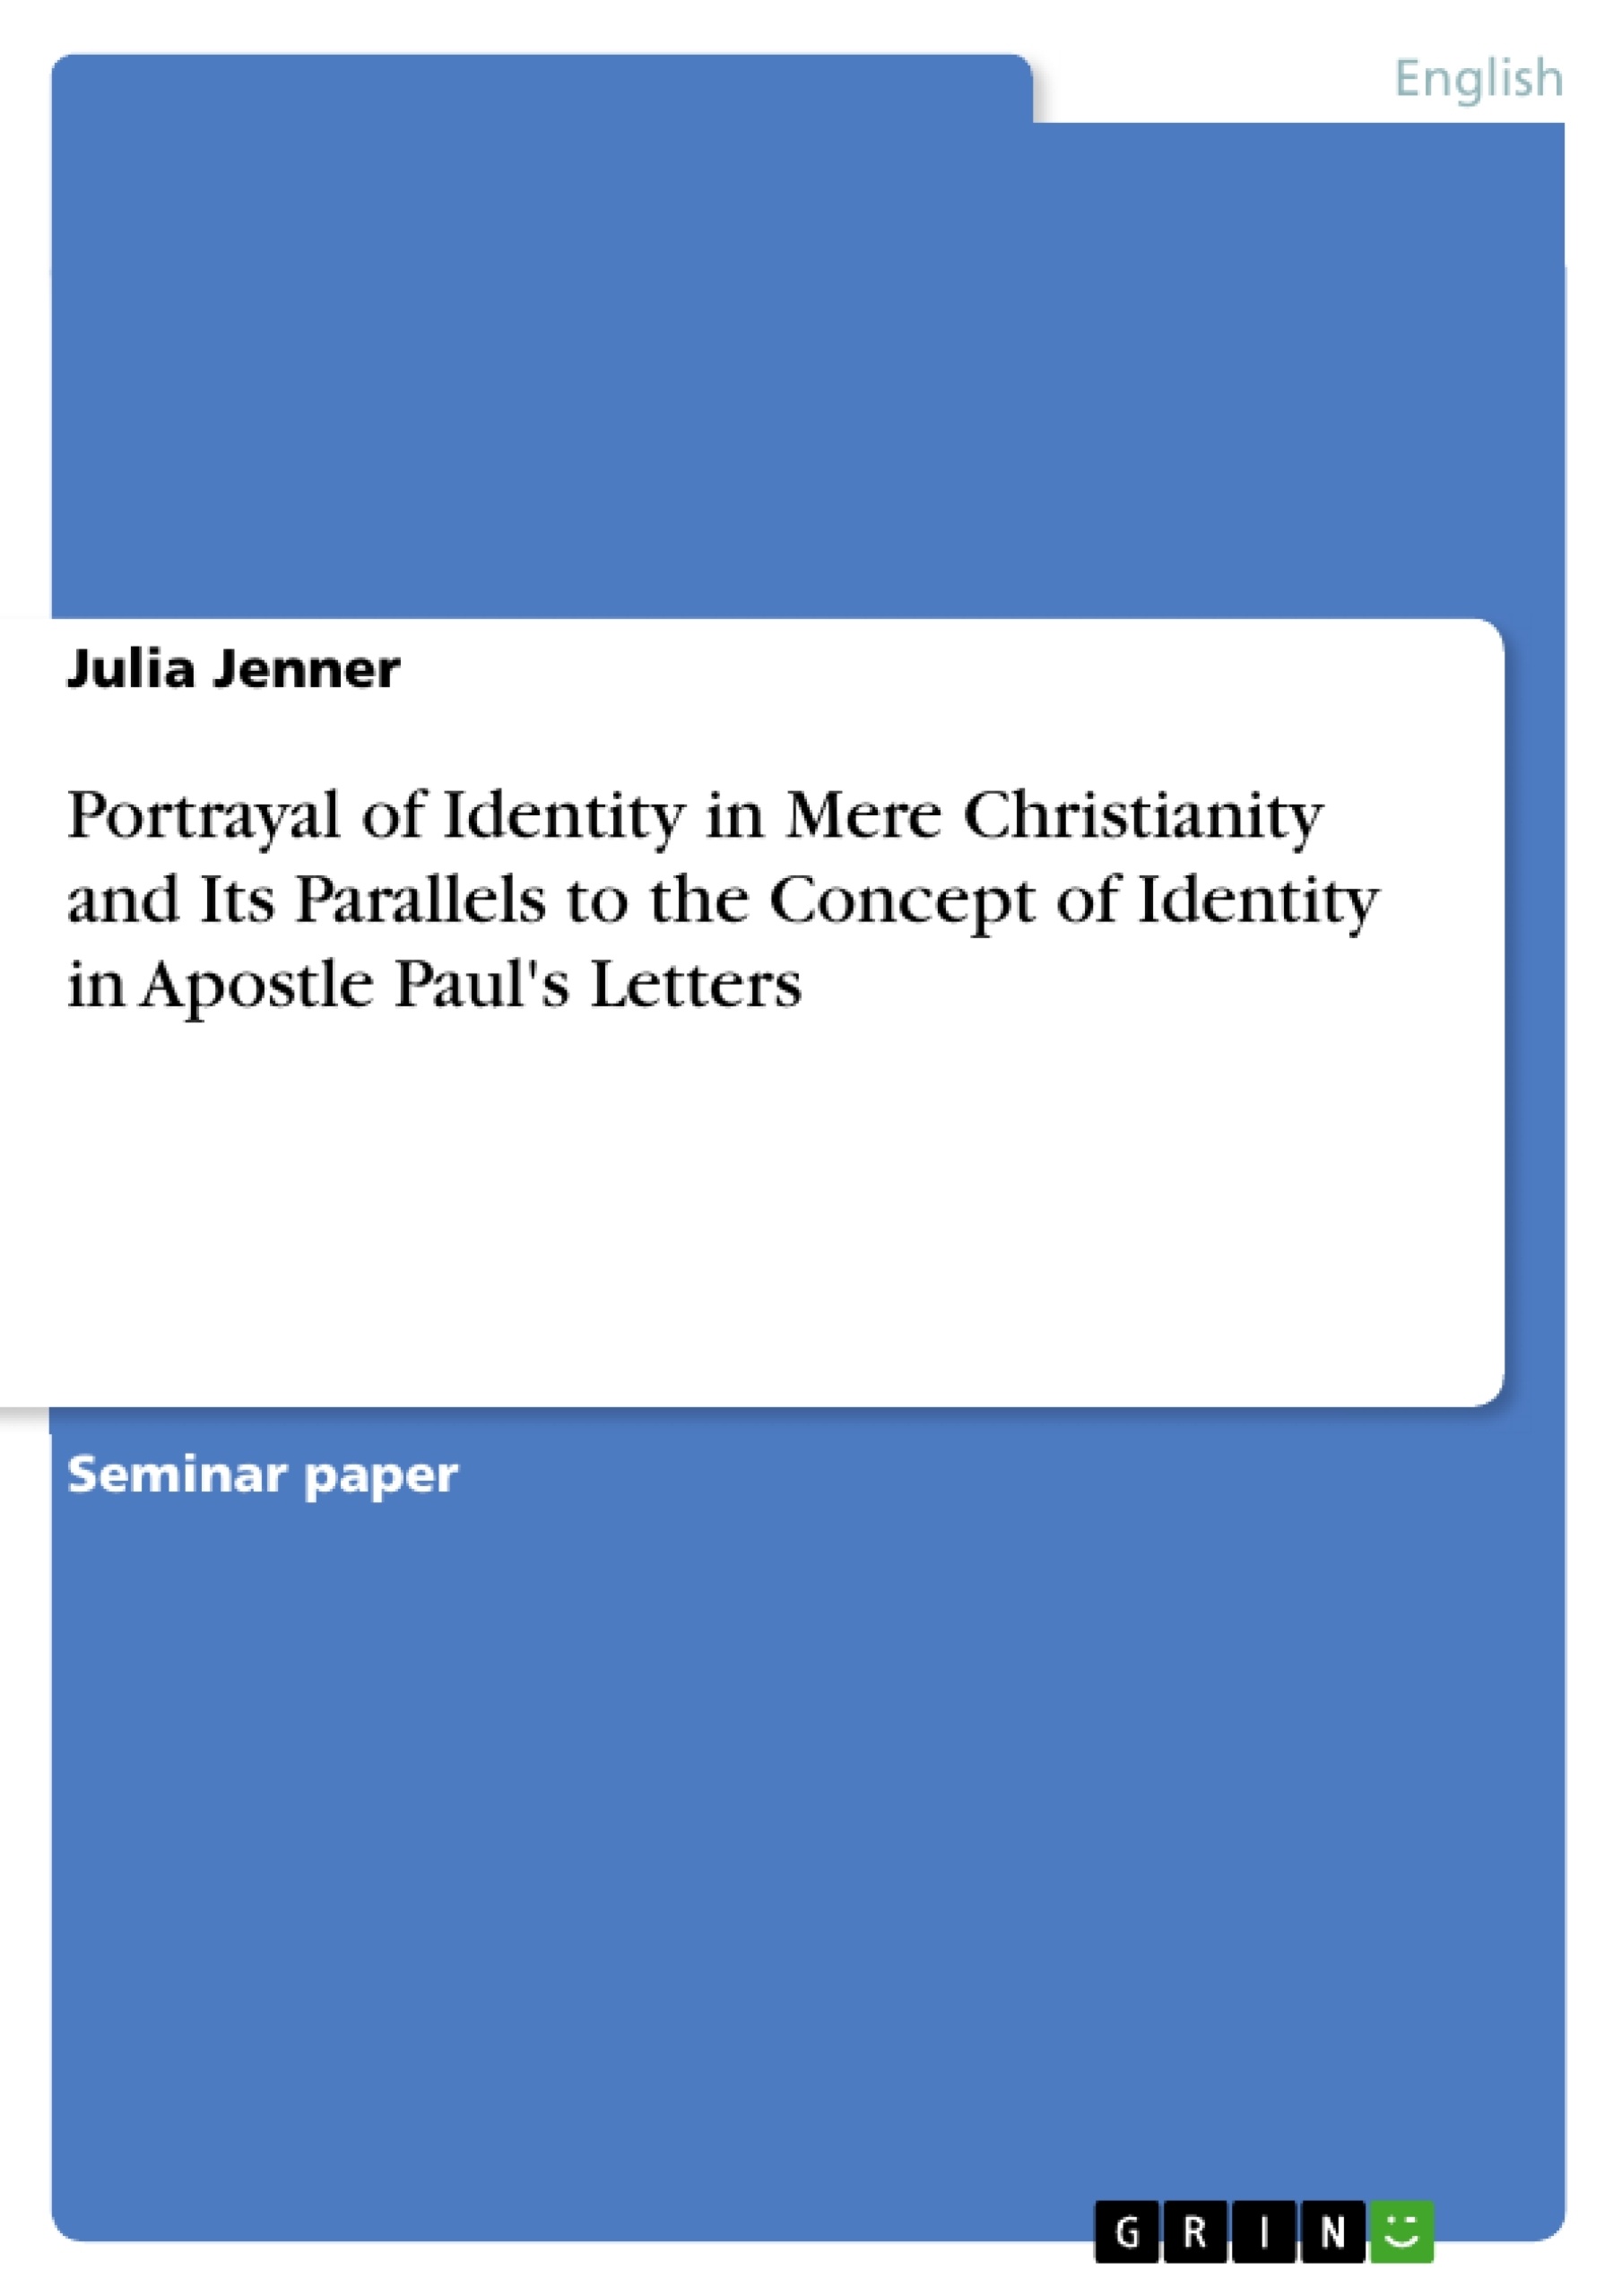 Titre: Portrayal of Identity in Mere Christianity and Its Parallels to the Concept of Identity in Apostle Paul's Letters